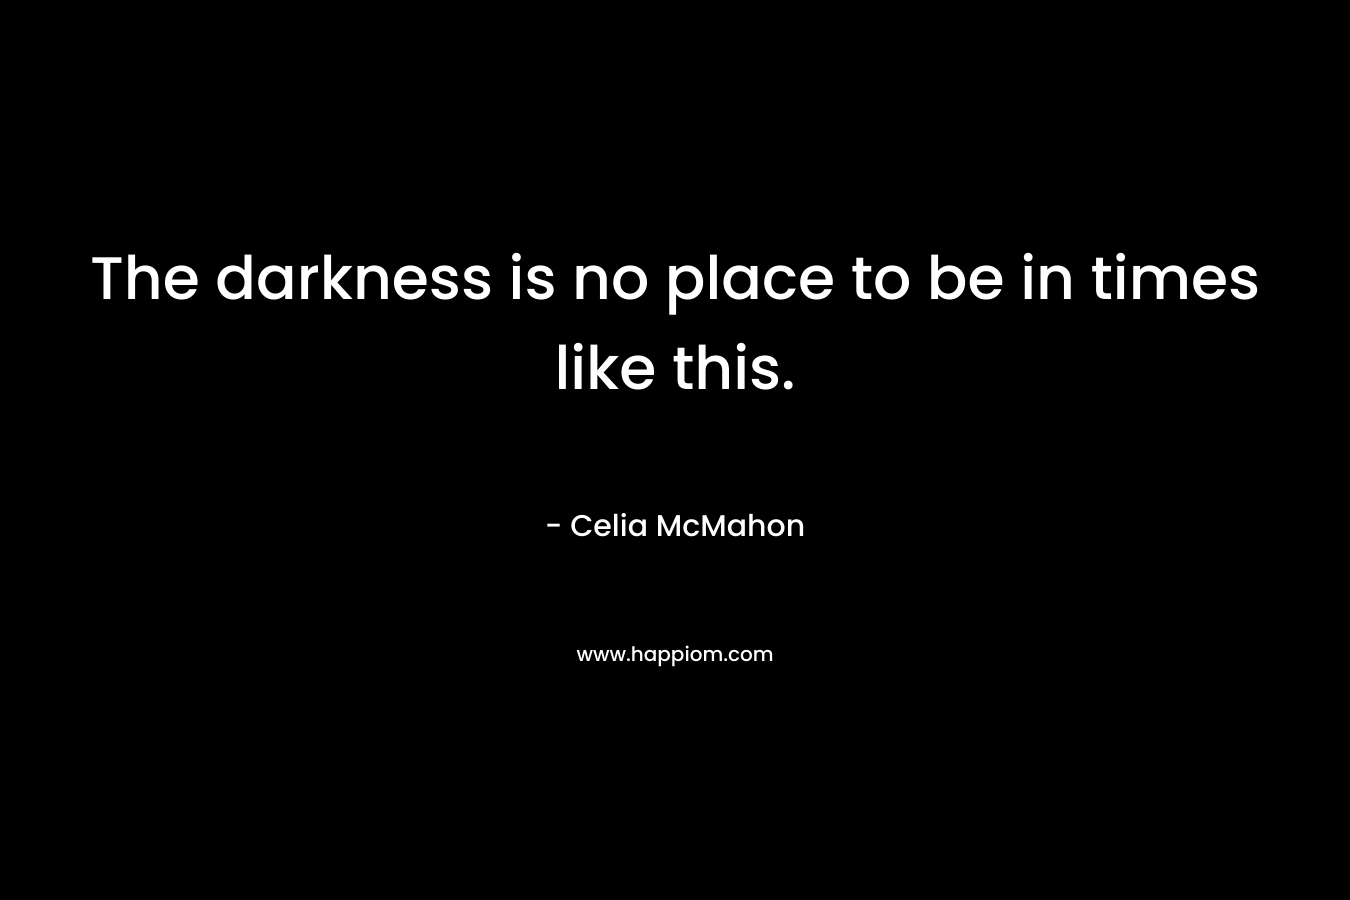 The darkness is no place to be in times like this. – Celia McMahon